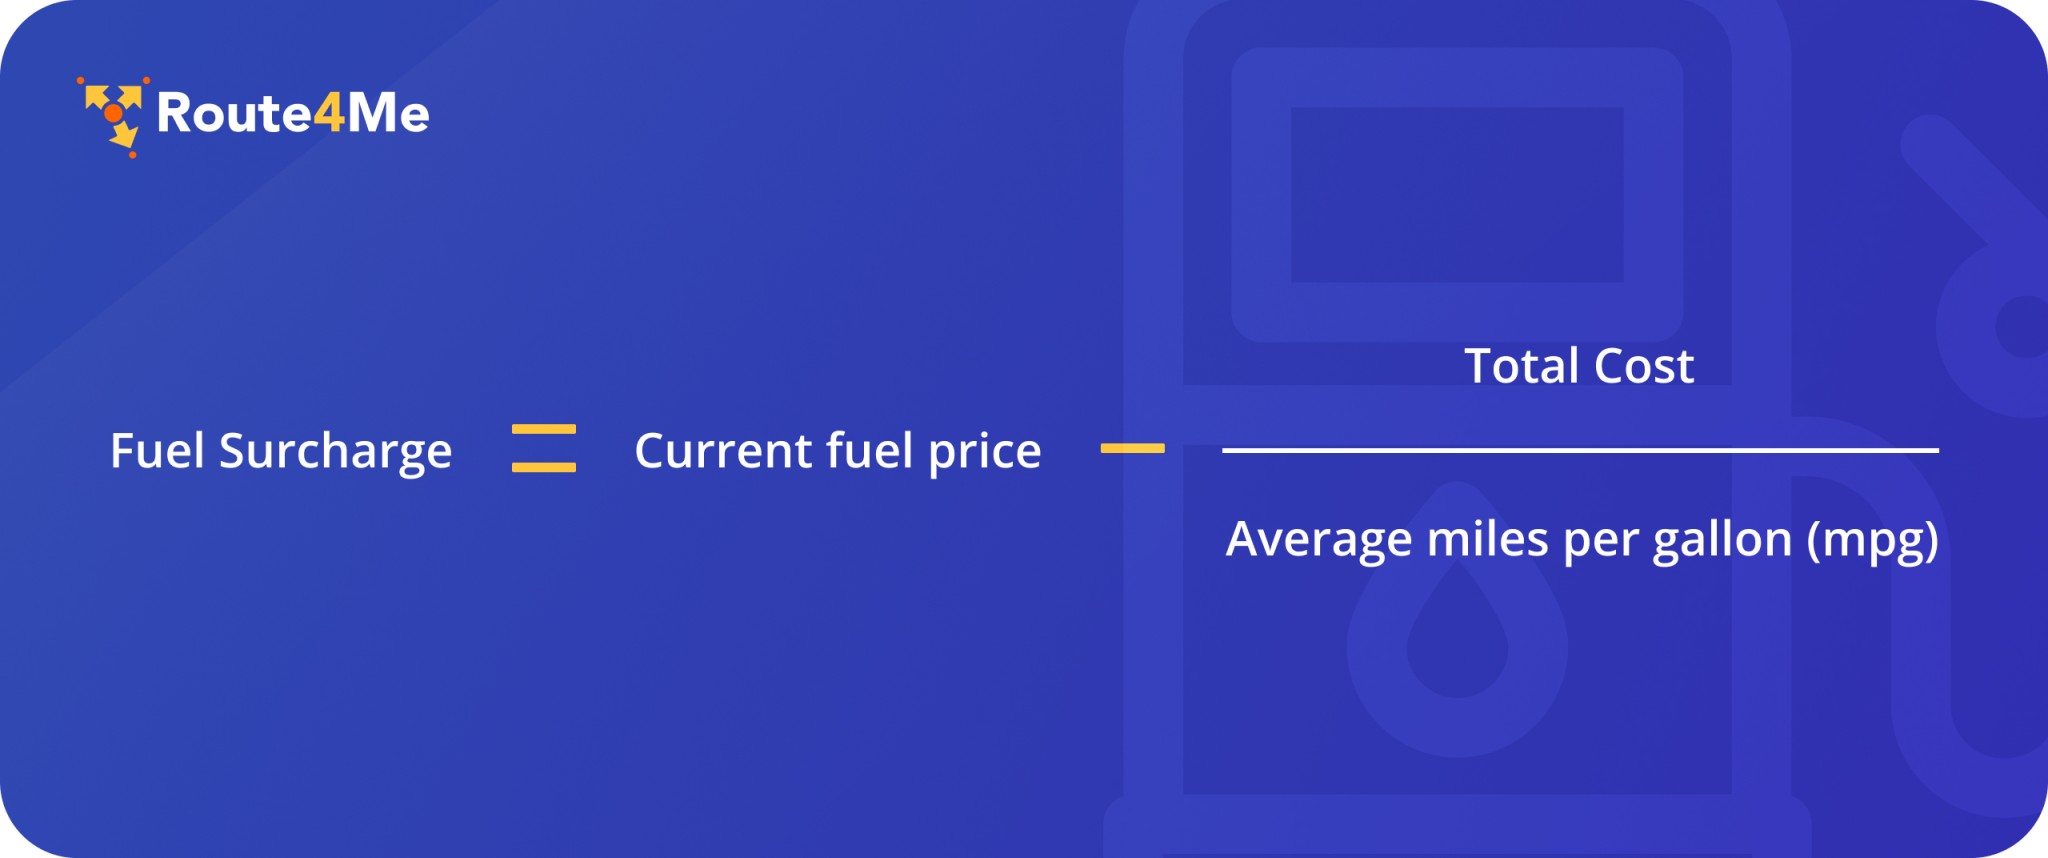 Fuel Surcharge in the U.S.